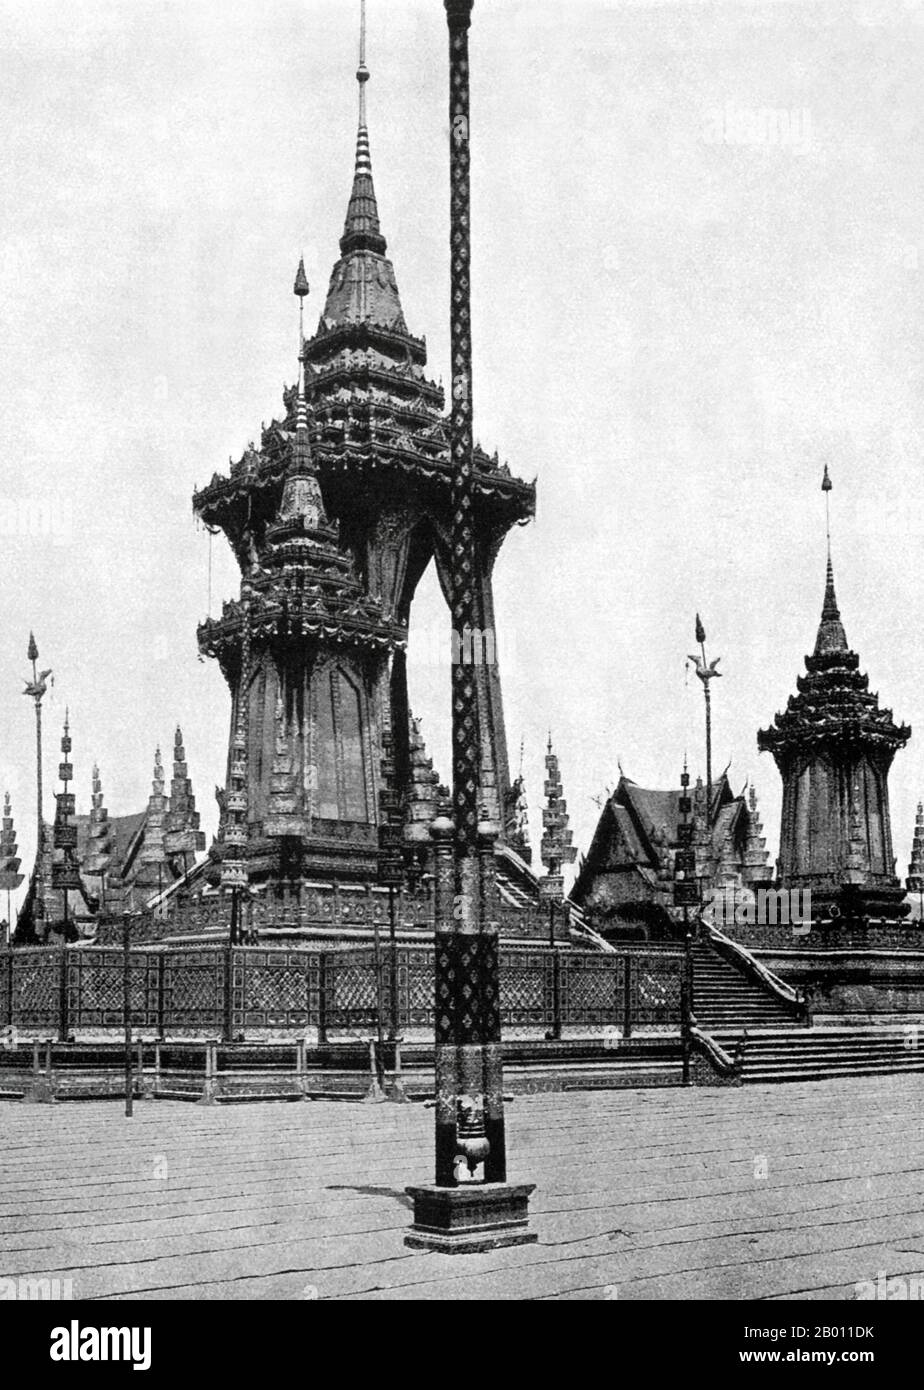 Thailand: Temporary monuments erected for the funeral of King Chulalongkorn in Bangkok in March 1911.  Elaborate pavilions and Buddhist temples are traditionally constructed especially for royal funerals in Siam. The body of the deceased was embalmed and preserved while the cremation site was built. Funereal rites and a period of mourning could take months or even a year before the funeral took place. The embalmed body was then placed in a kneeling position in a gold urn on a high bier inside an ornate edifice to be cremated. Stock Photo